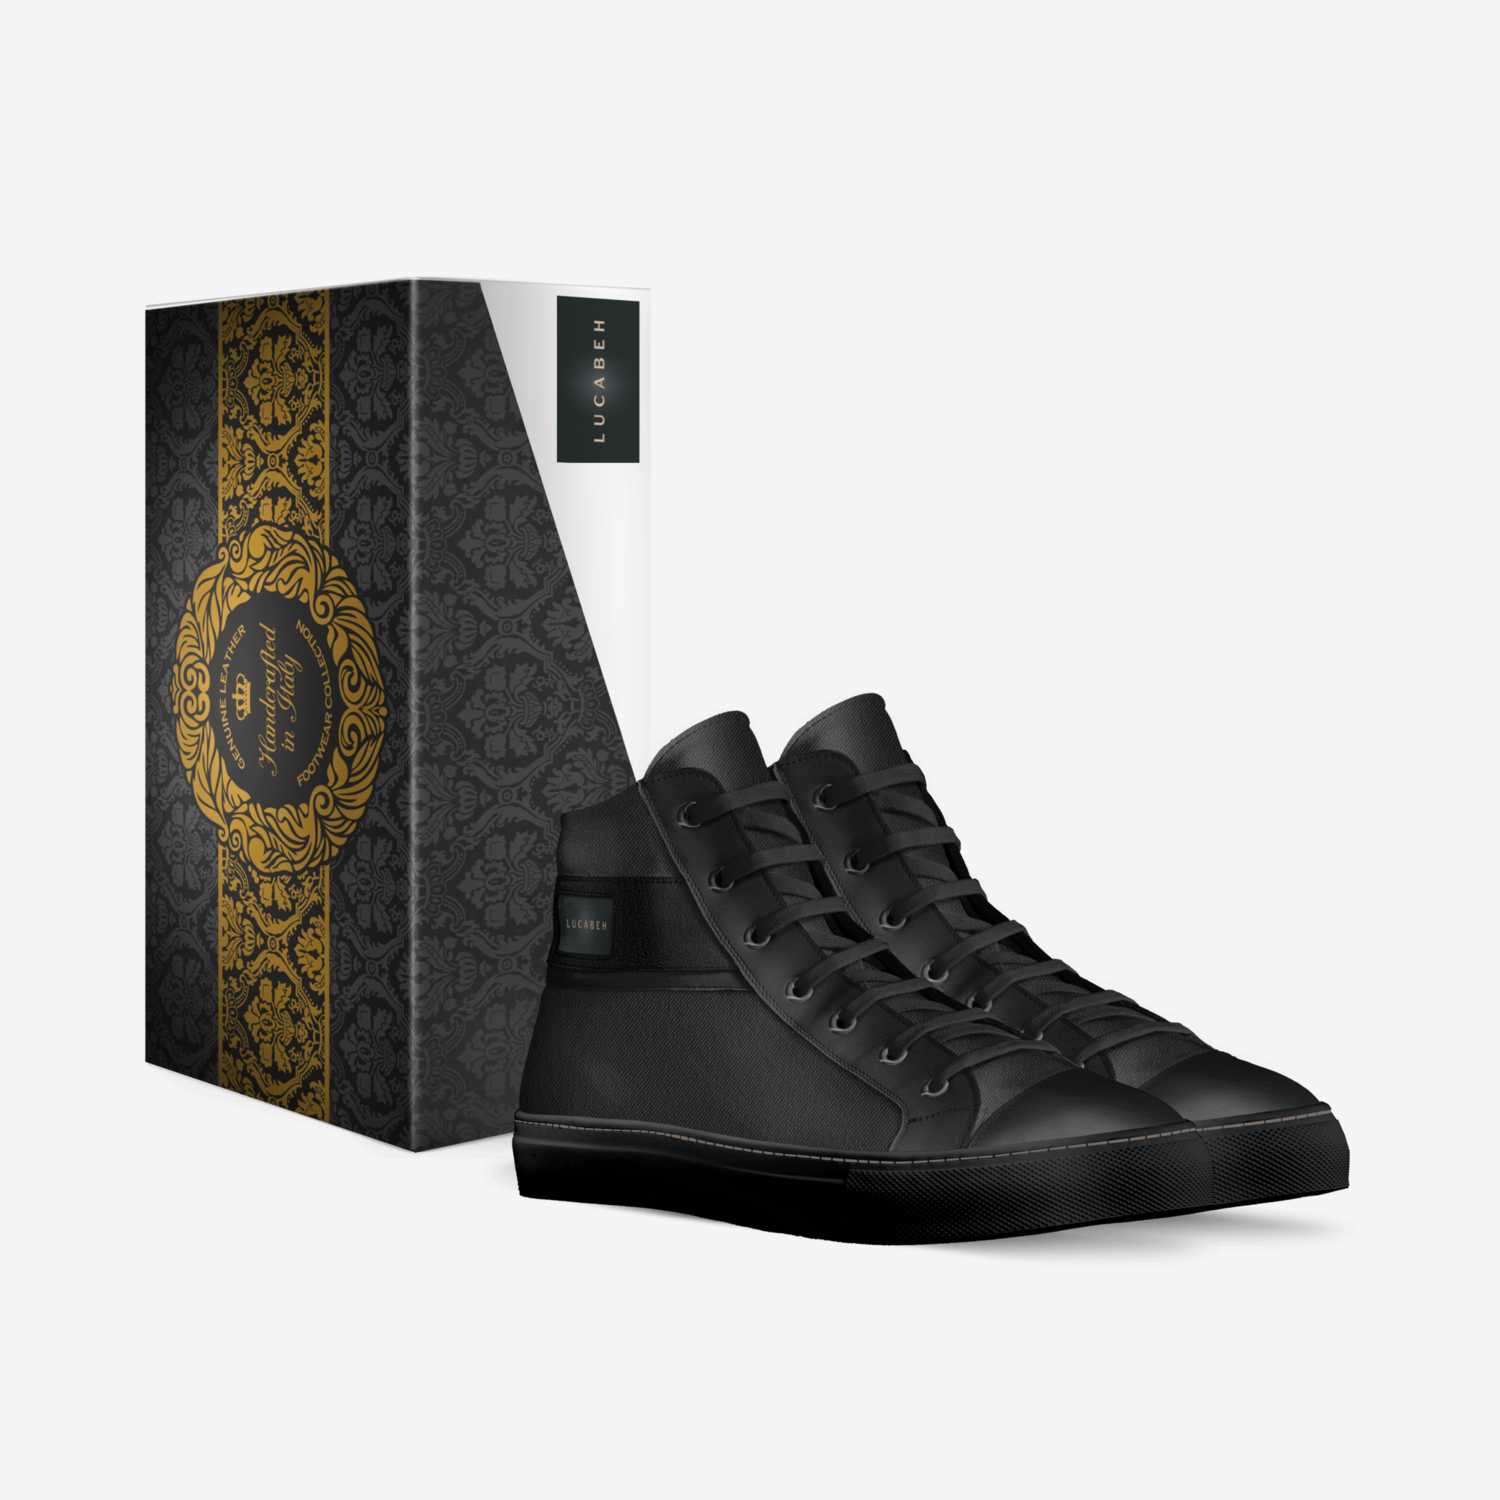 LUCABEH-NOCTIS custom made in Italy shoes by Luke Streff | Box view